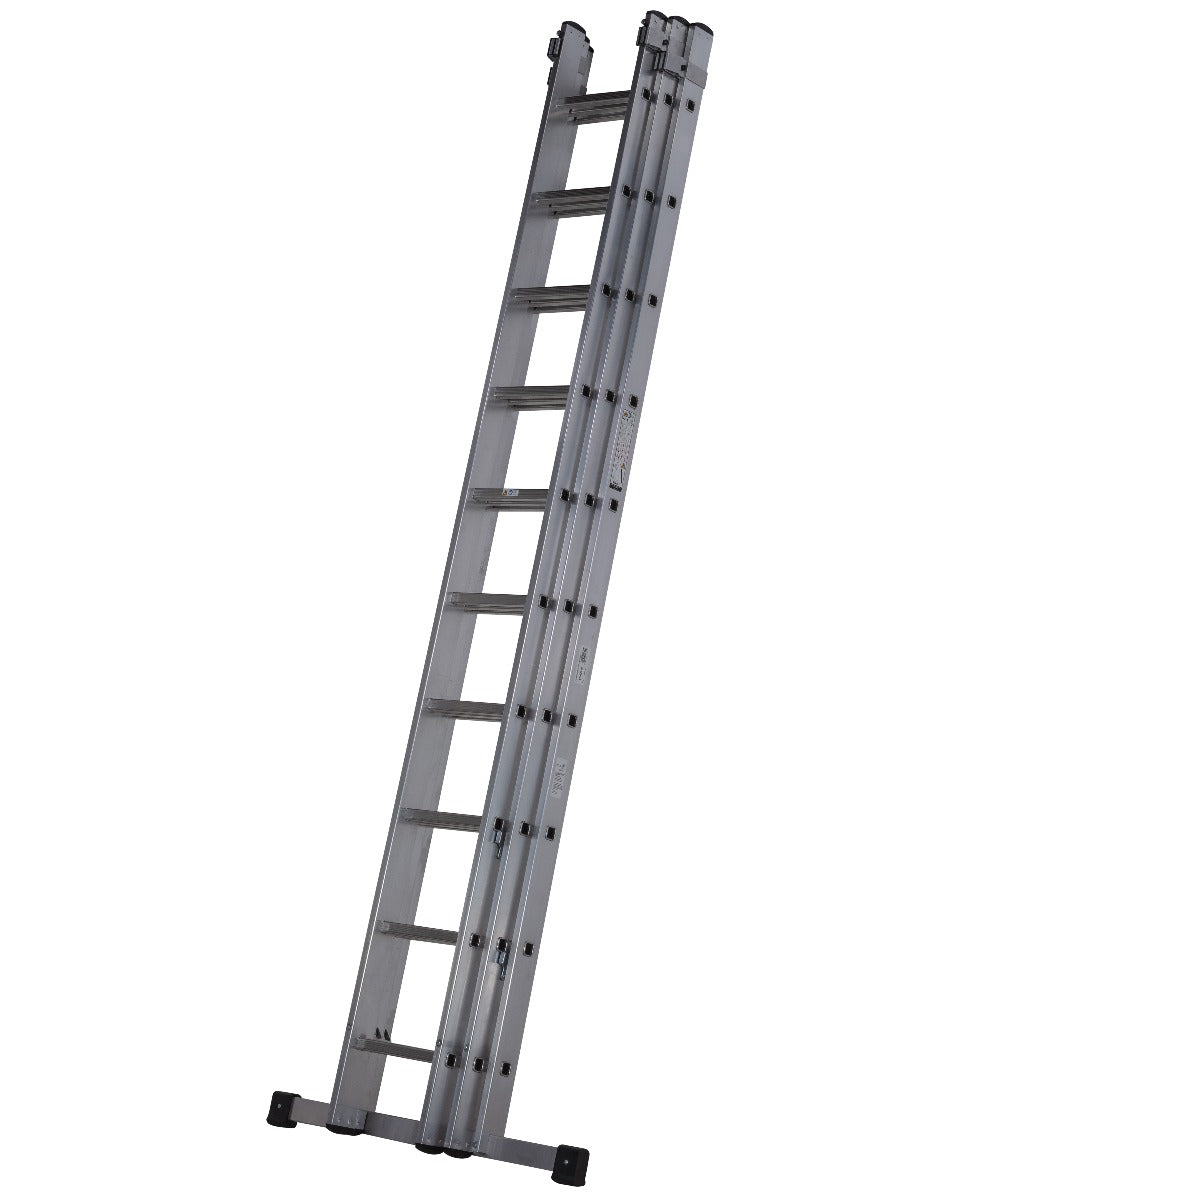 Werner 577 Series Triple Extension Ladder - 3 x 8 Closed